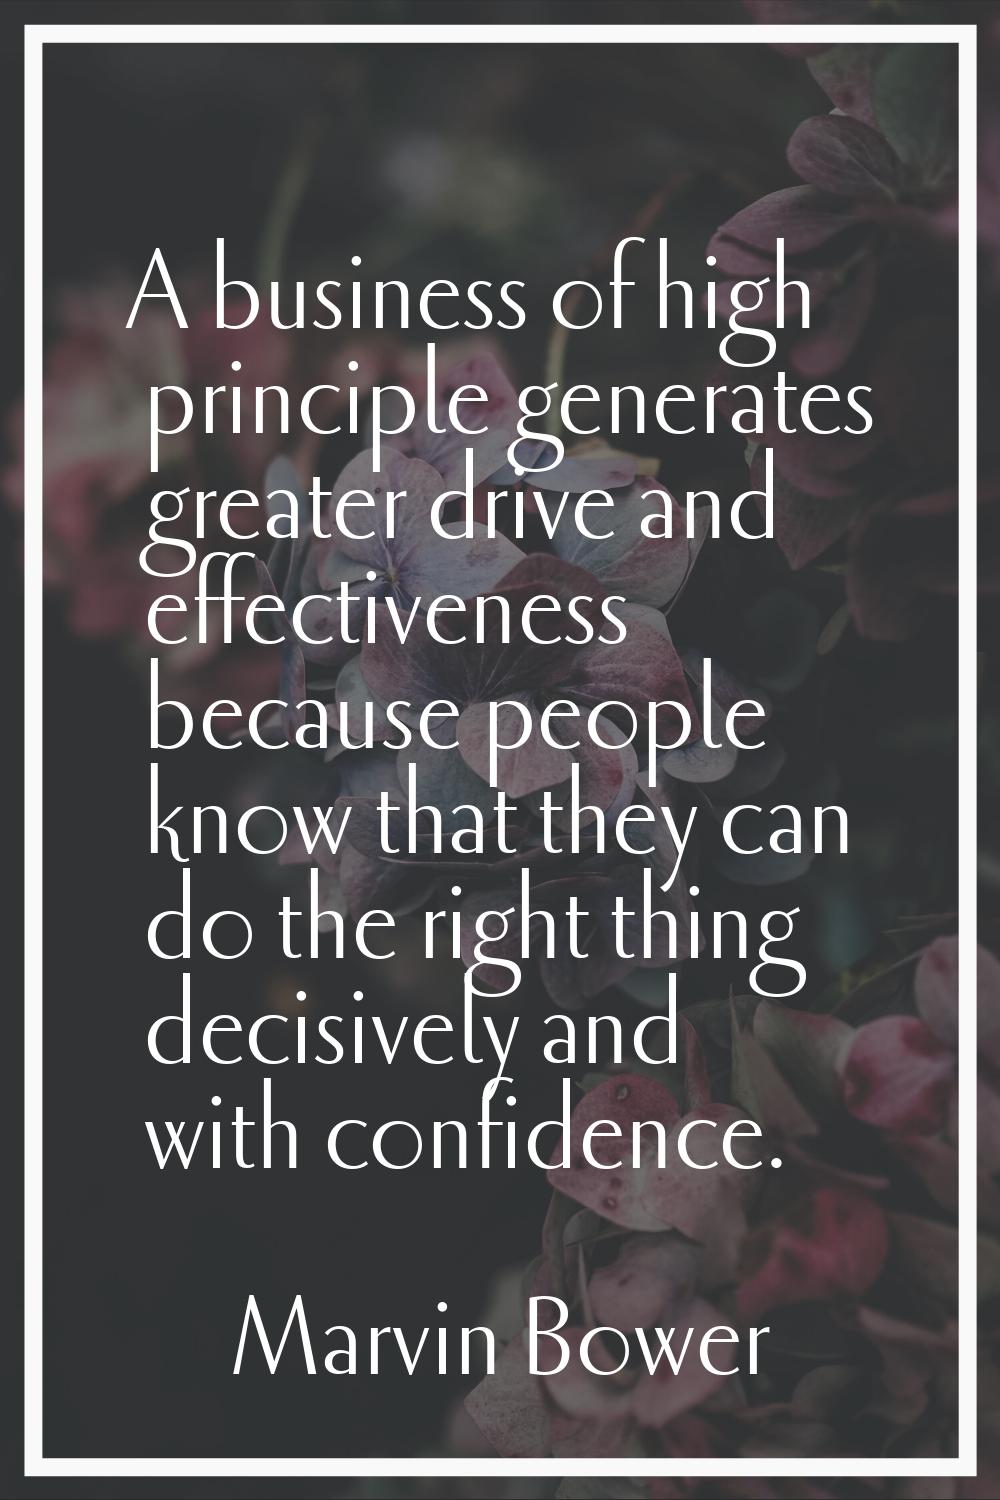 A business of high principle generates greater drive and effectiveness because people know that the